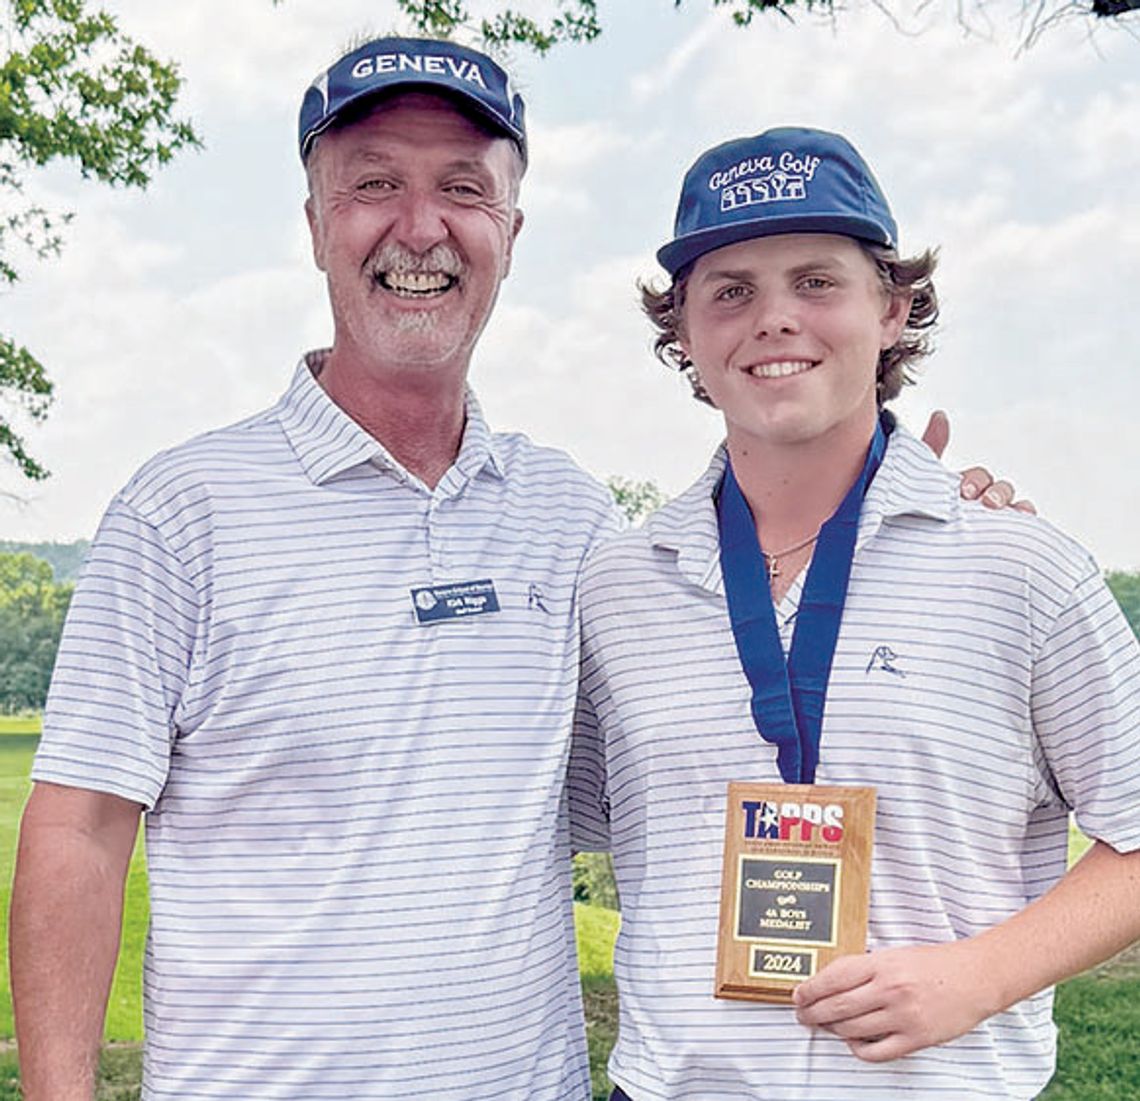 Hulett wins individual state title as Geneva golf teams compete at state